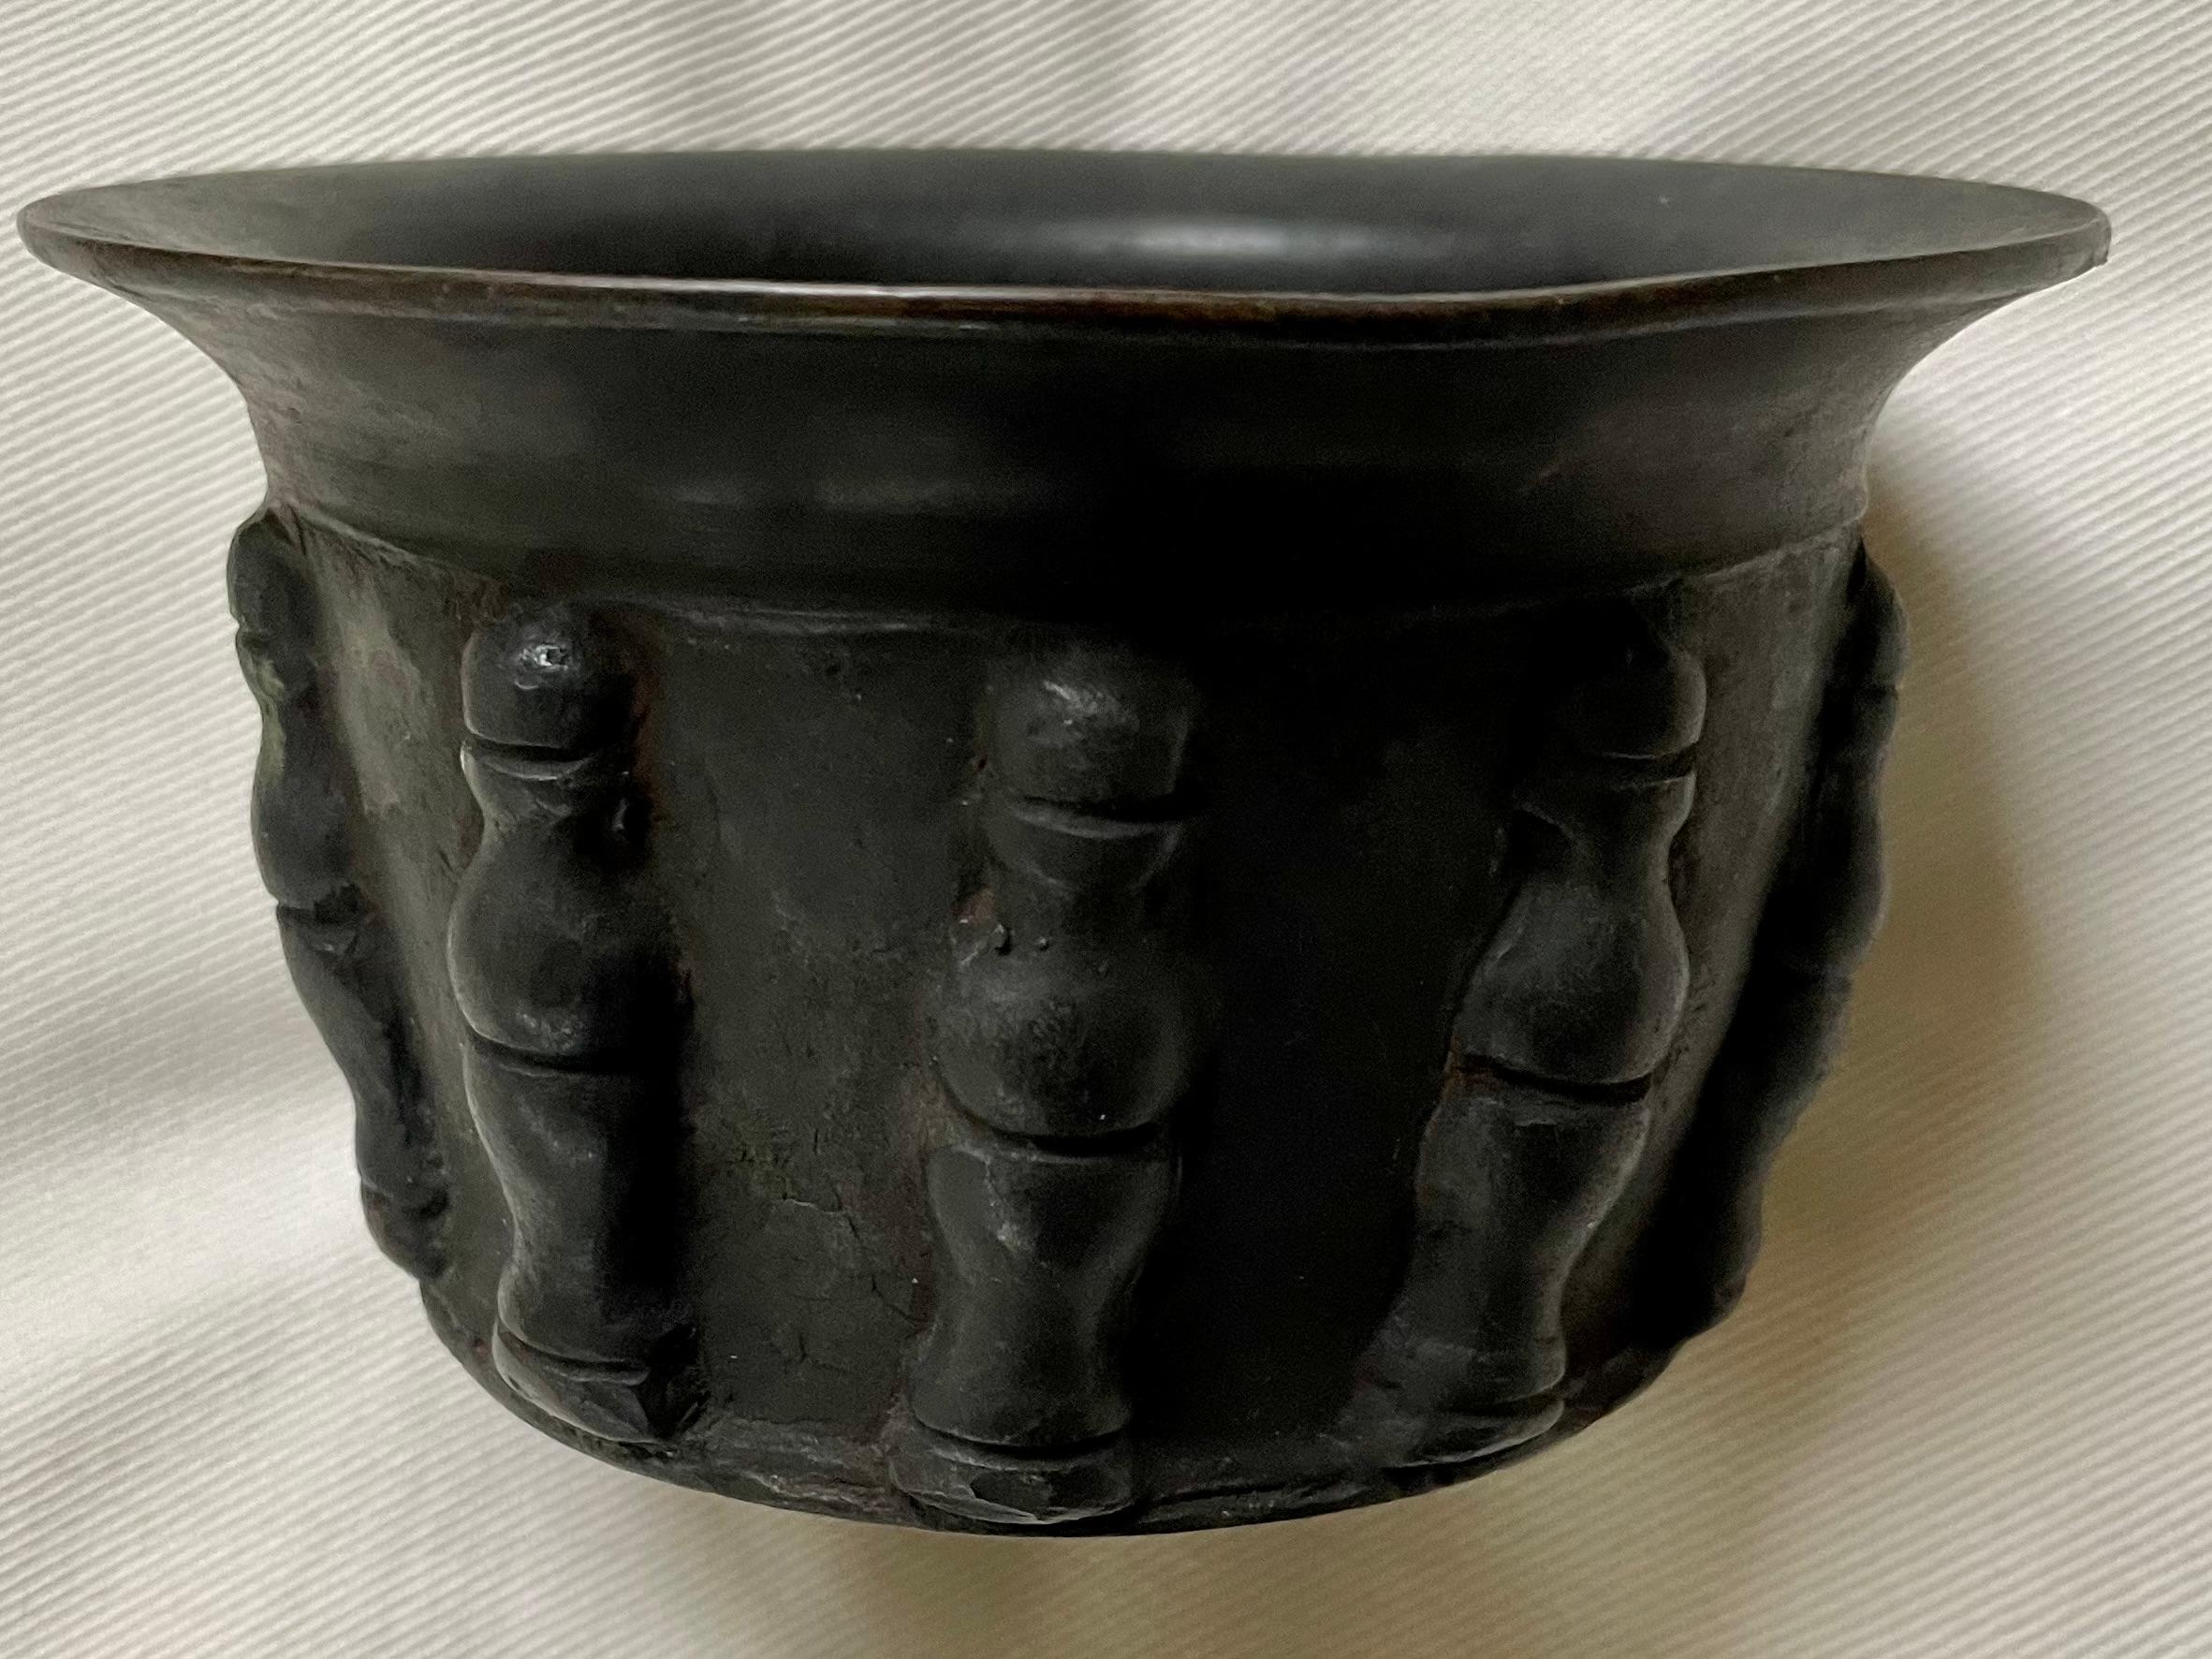 Bronze baluster bowl. Antique bronze votive bowl with ten bronze balusters punctuating the outer surface in high relief. Italy 16th century. 

Dimensions: 5” diameter top x 3.25